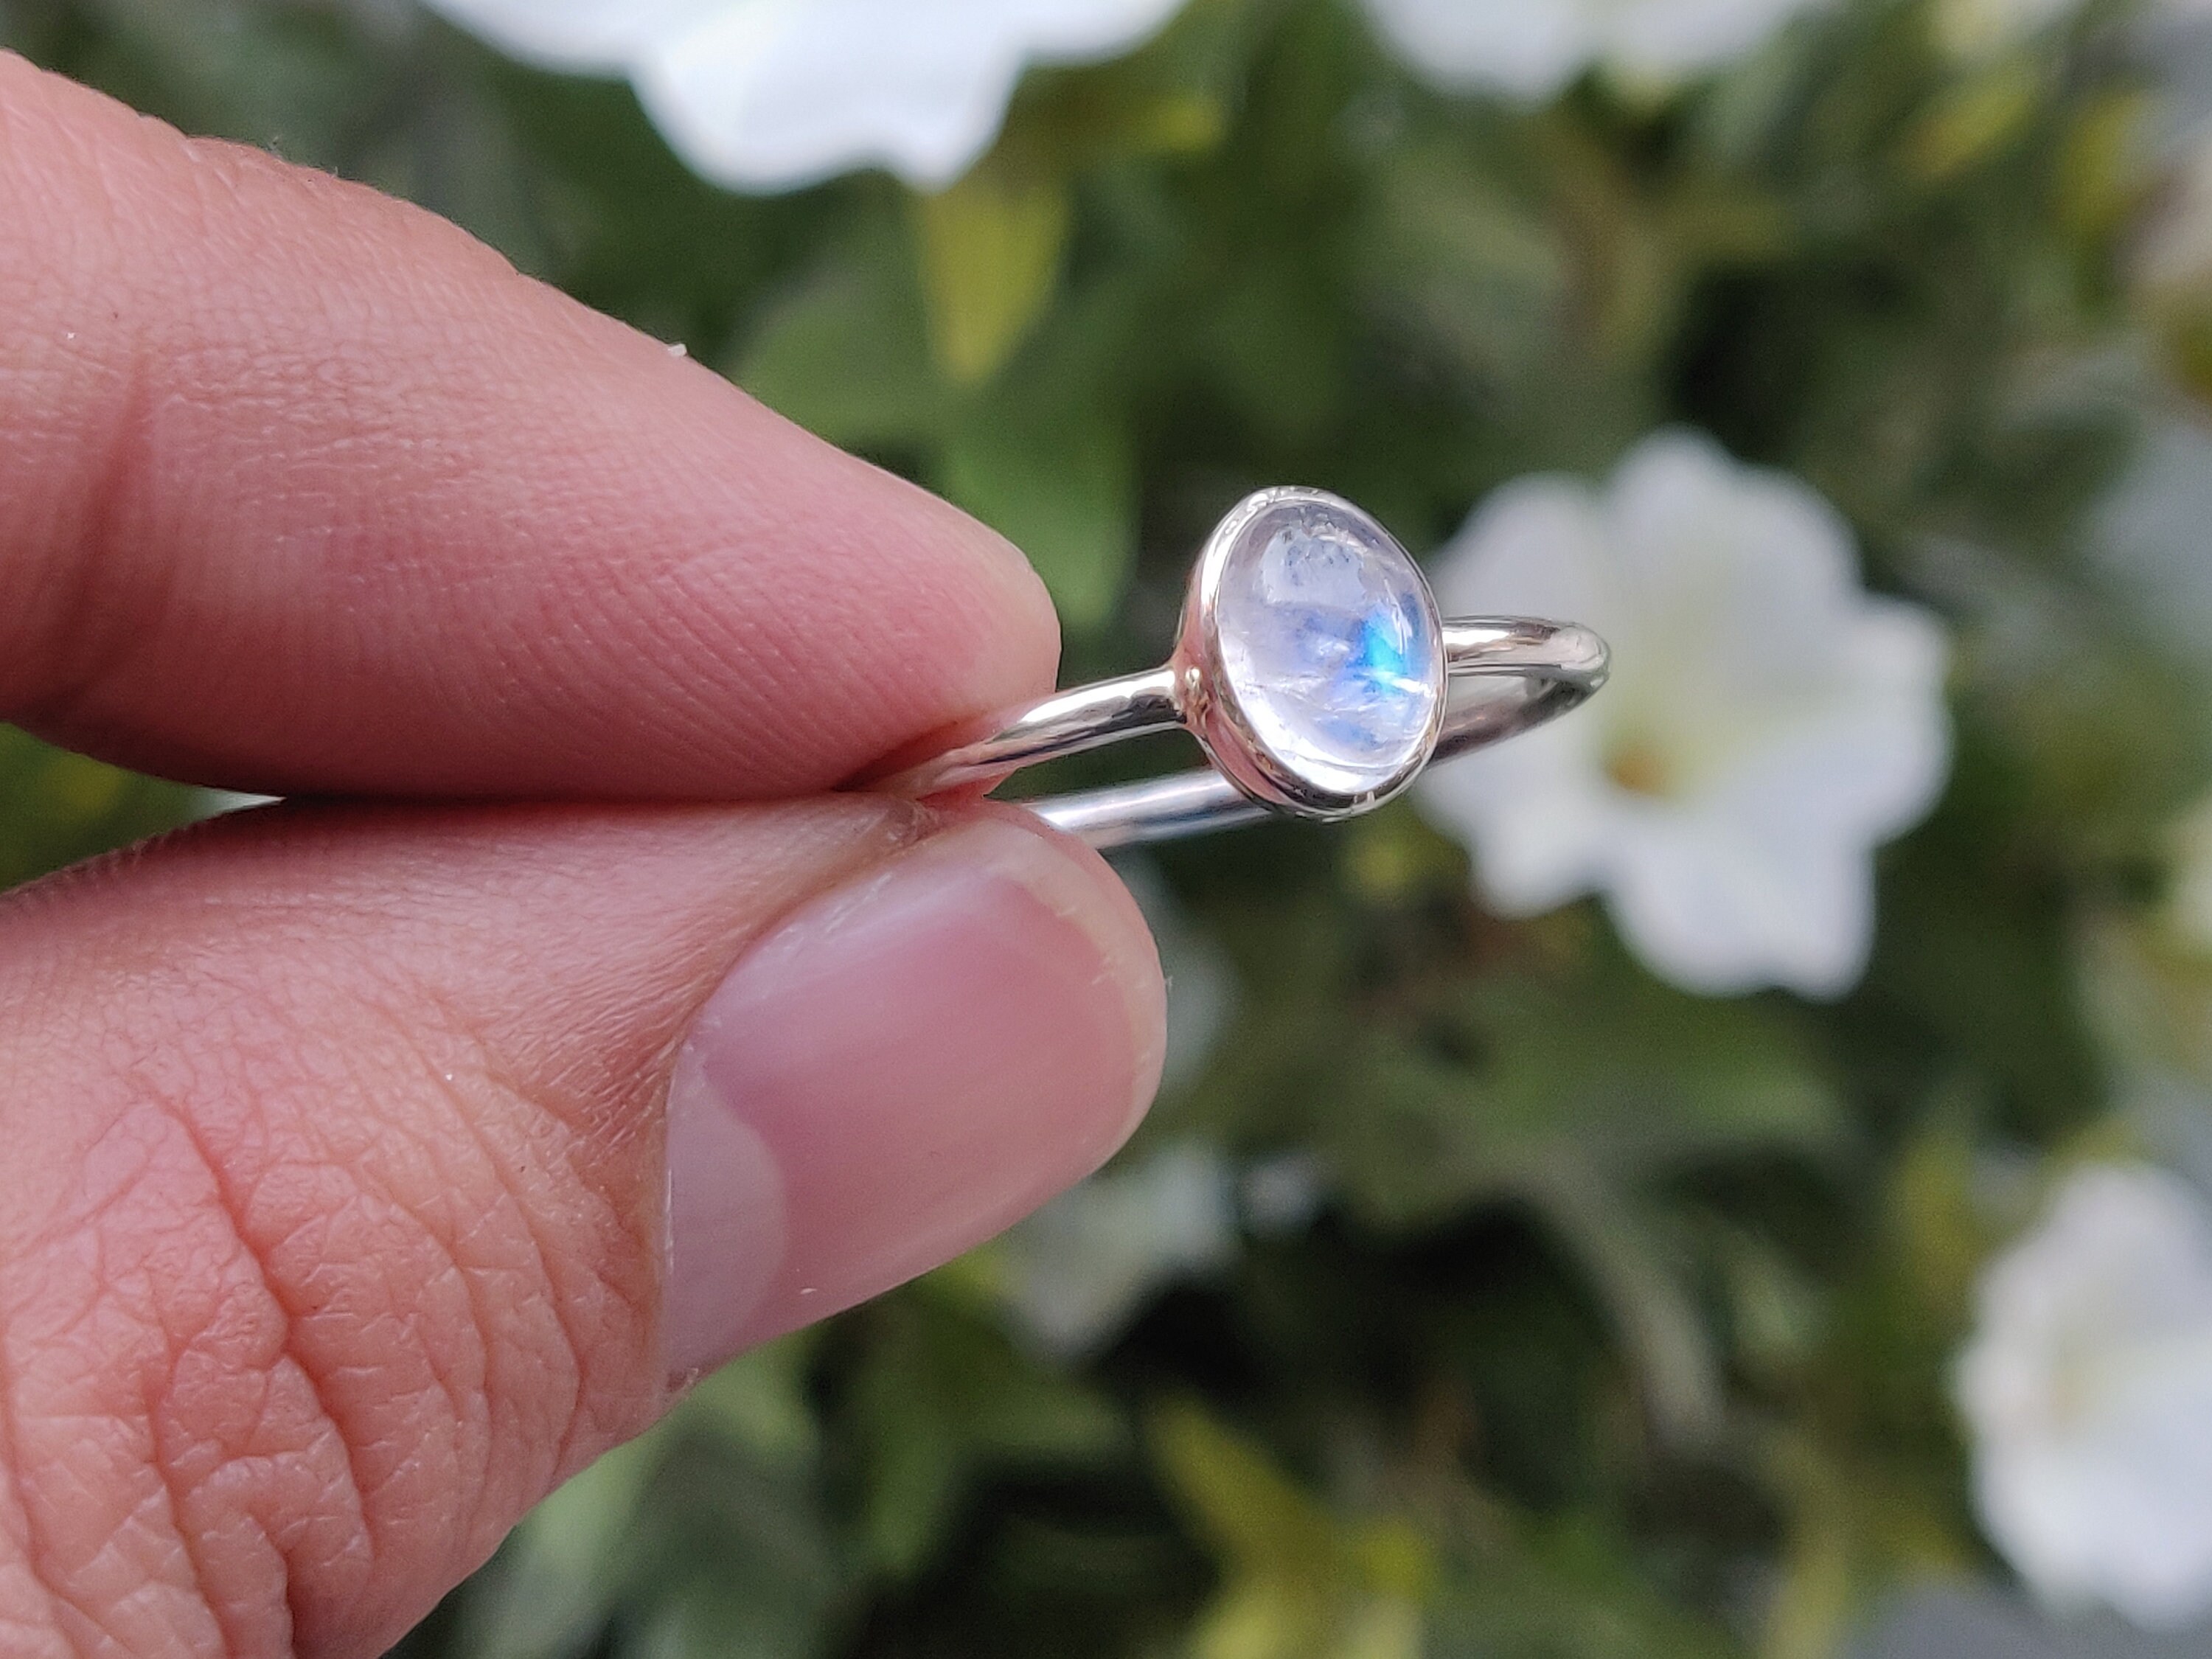 Natural White Sri Lankan Moonstone 925 Solid Sterling Silver Engagement Ring Size 7.5 